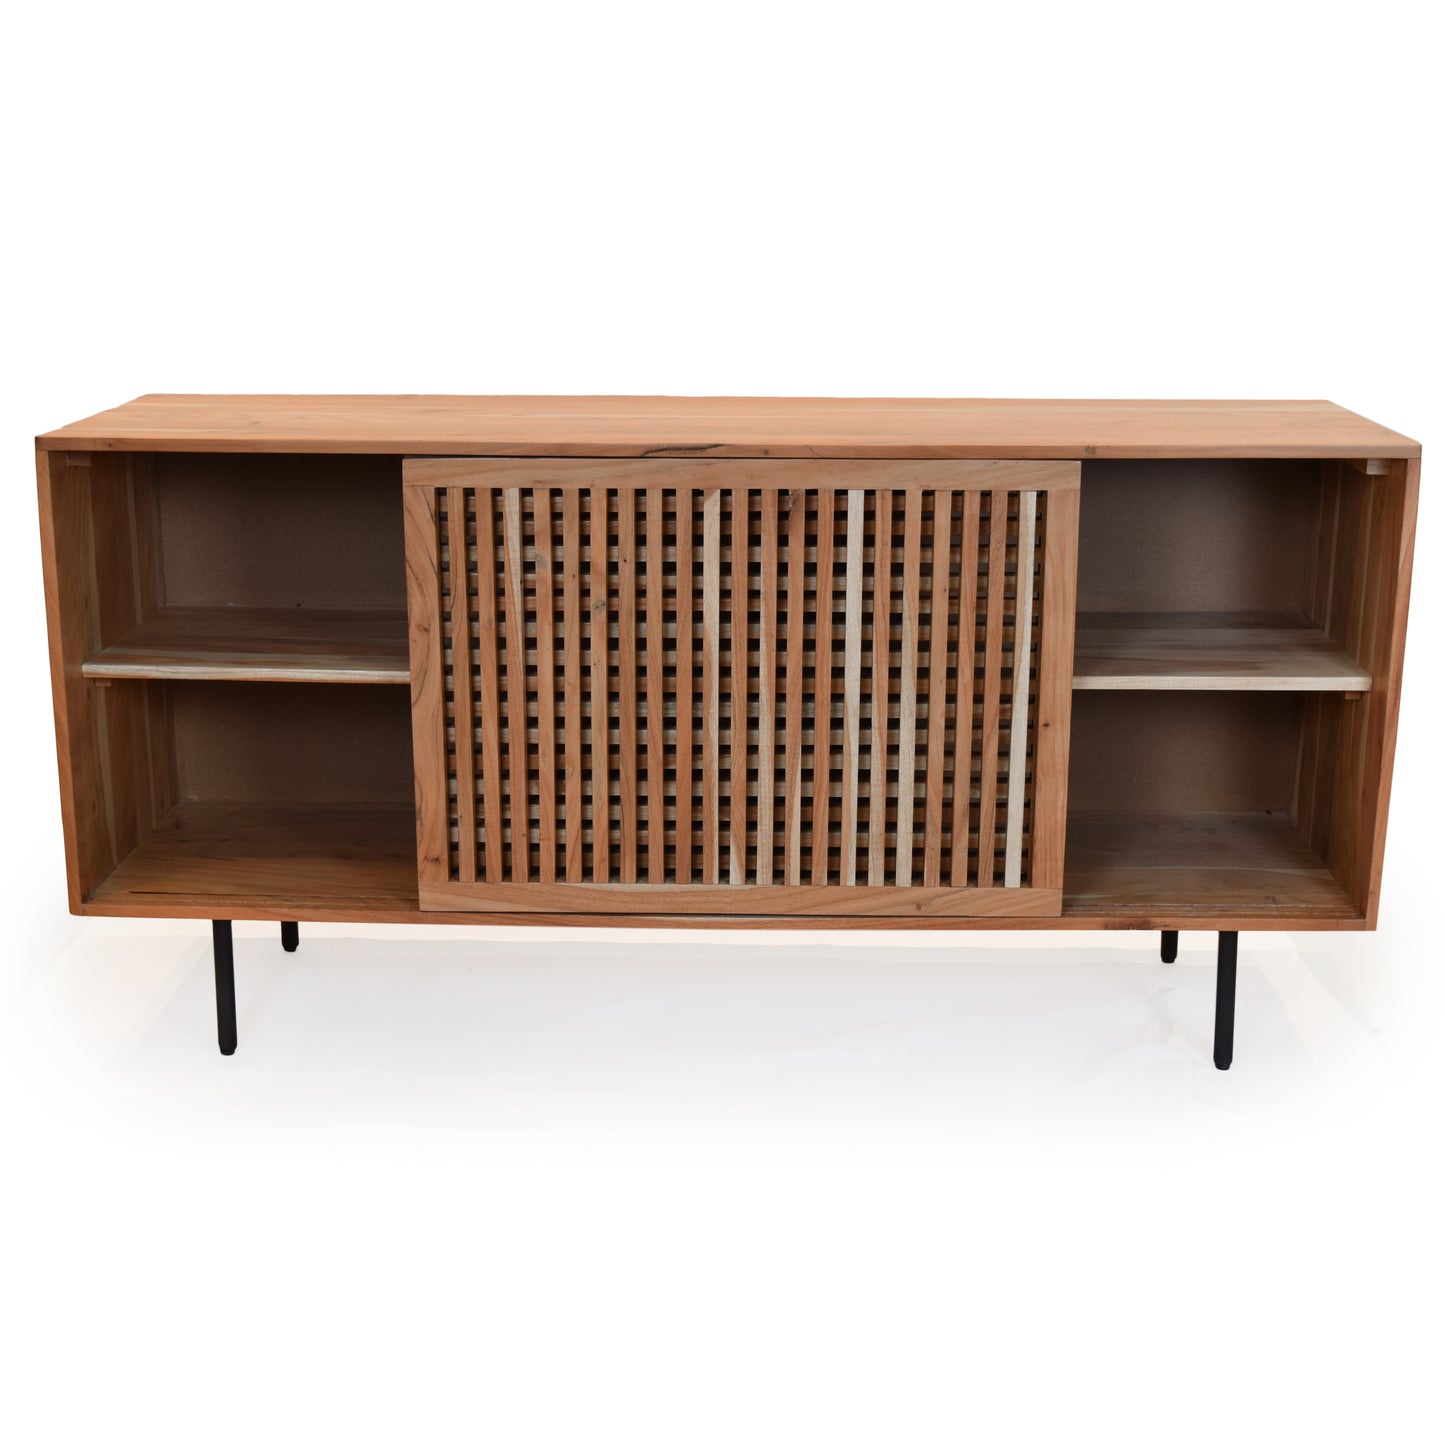 Modern Sideboard by HomeNEarth: Style and Function